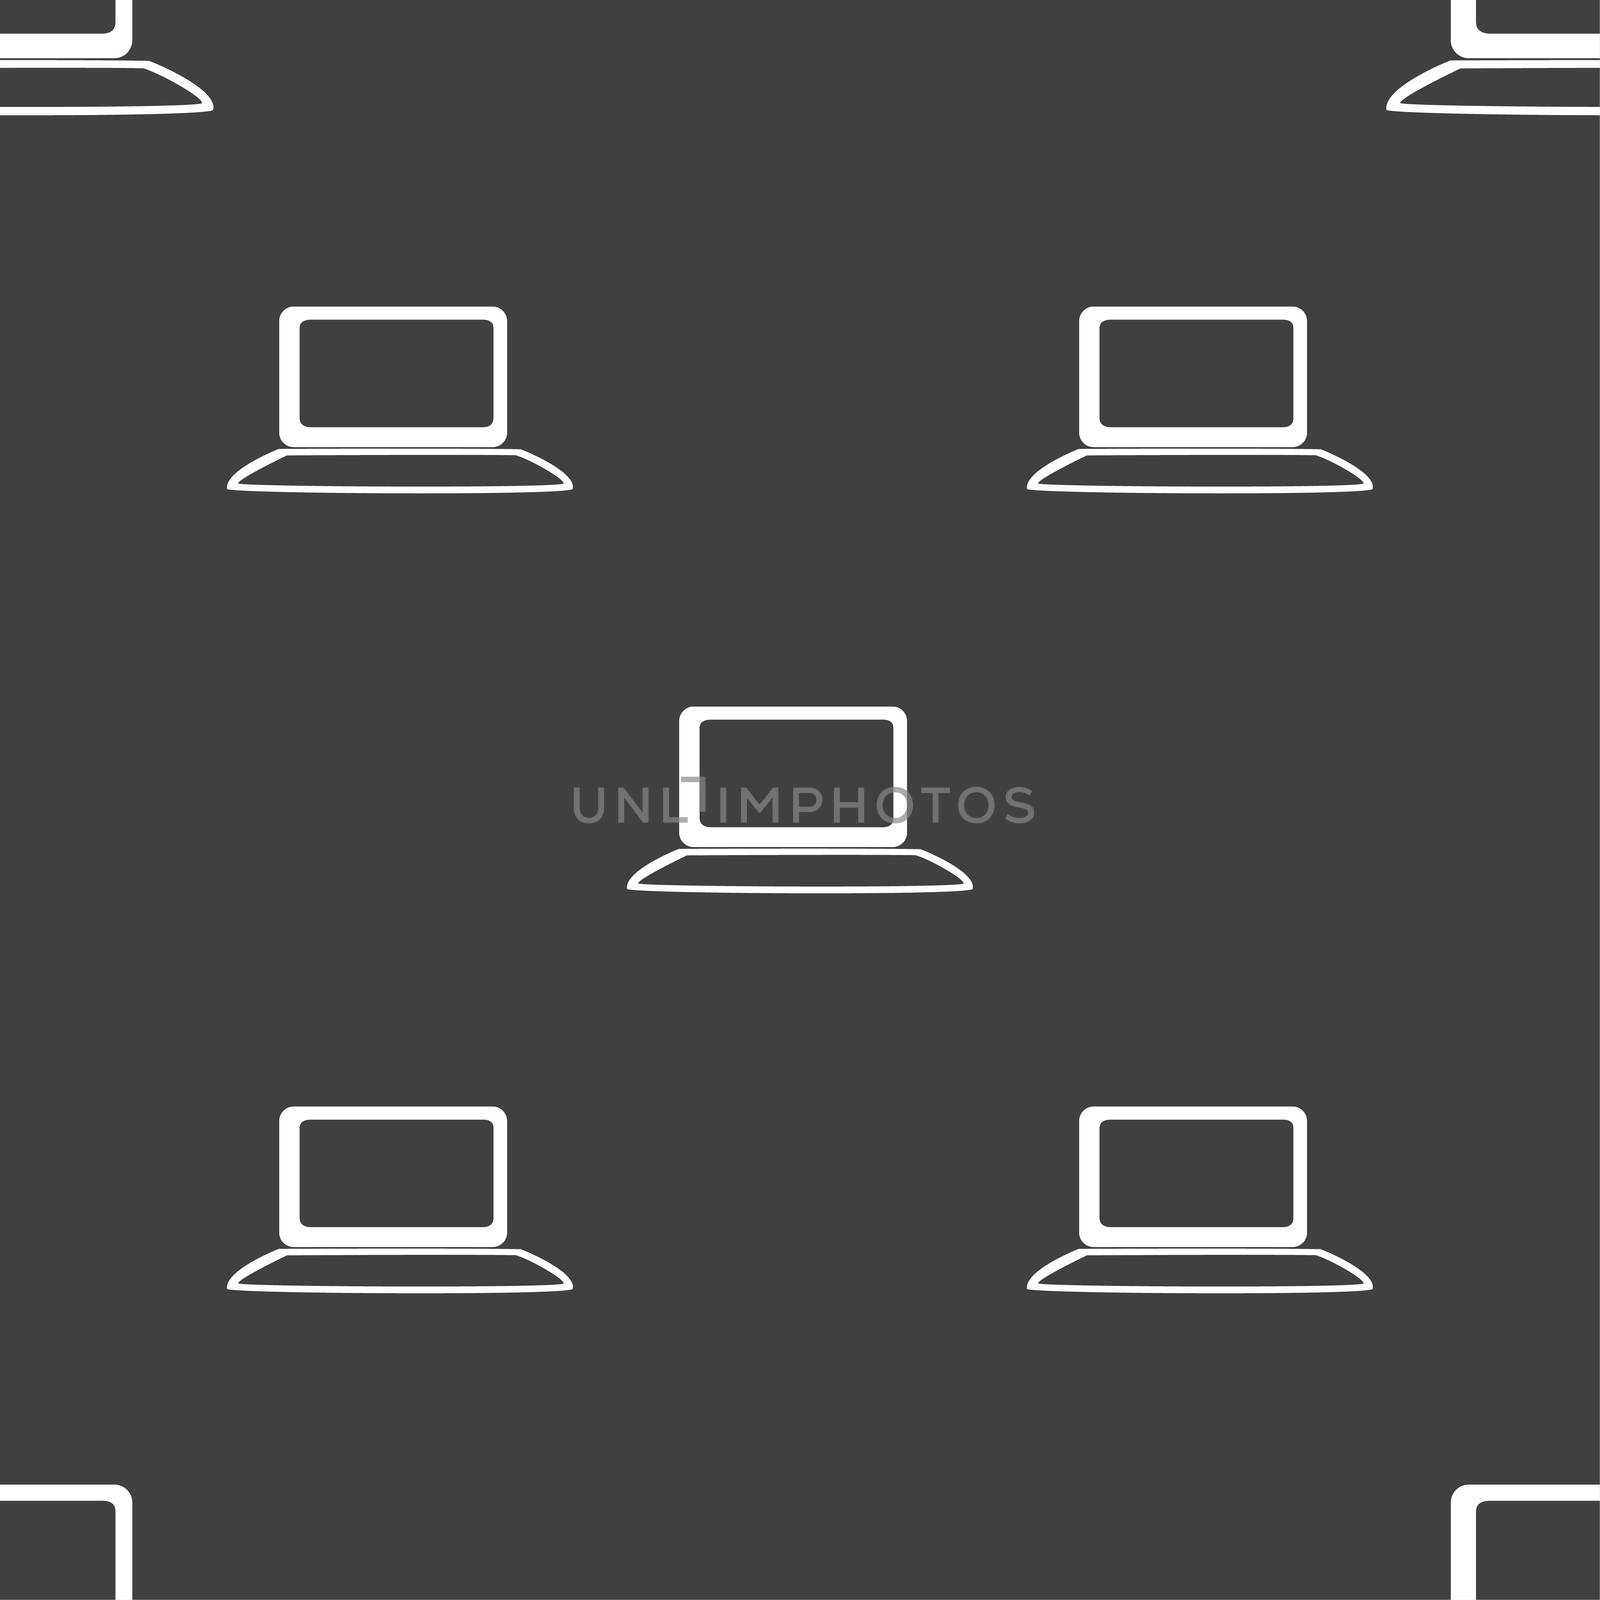 Laptop sign icon. Notebook pc with graph symbol. Monitoring. Seamless pattern on a gray background. illustration